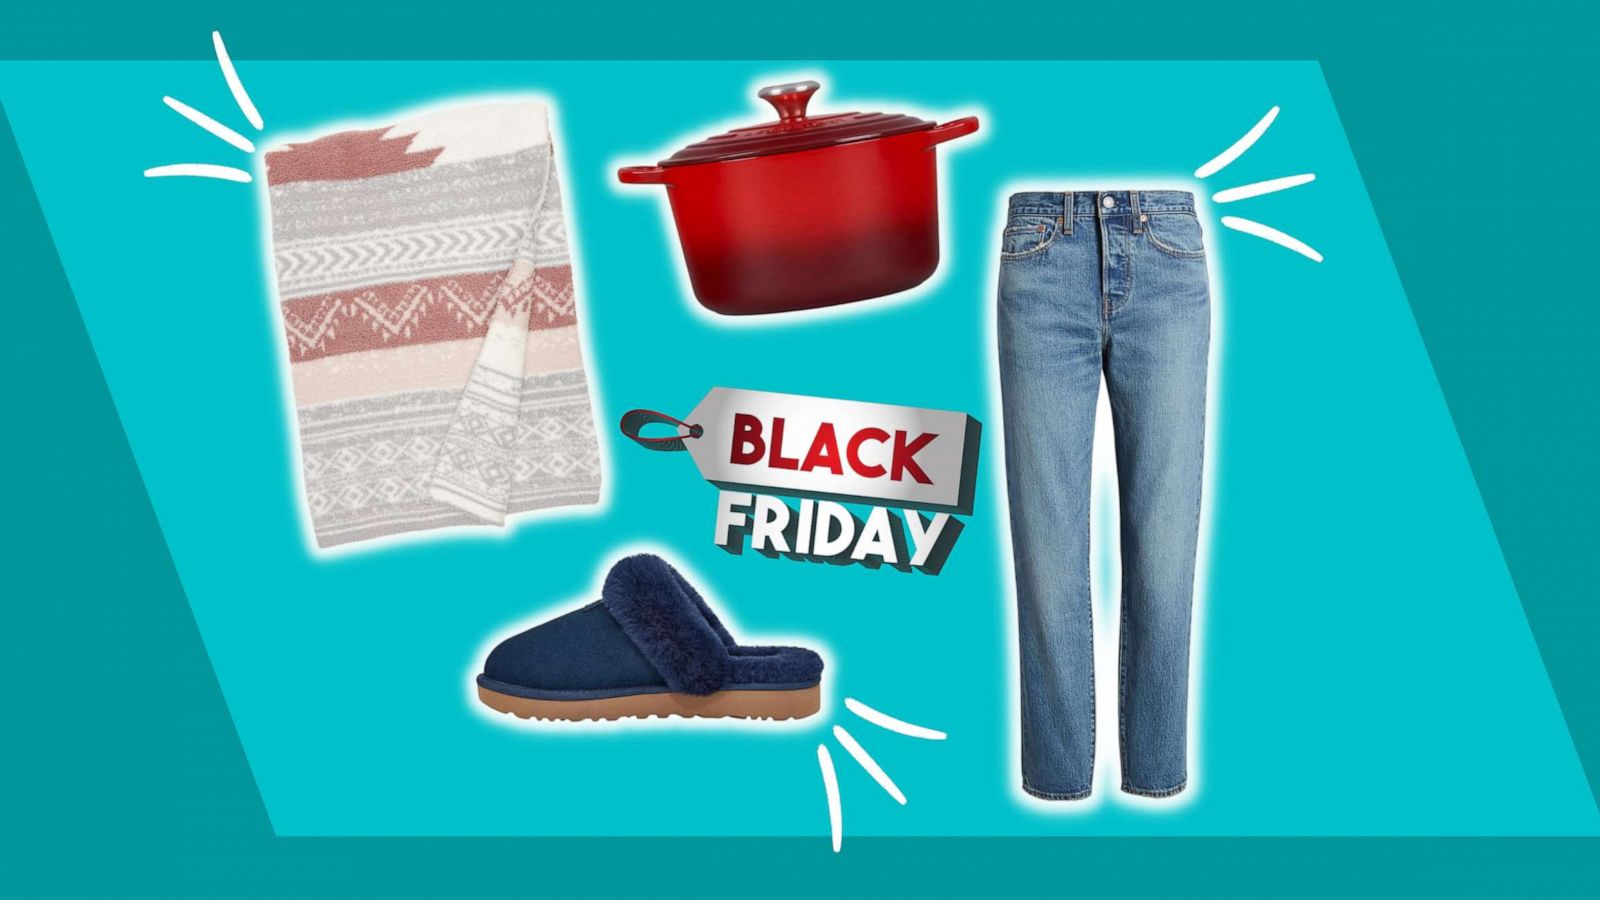 Nordstrom's Cyber Monday Sale: Shop deals on UGG, Barefoot and more - Good Morning